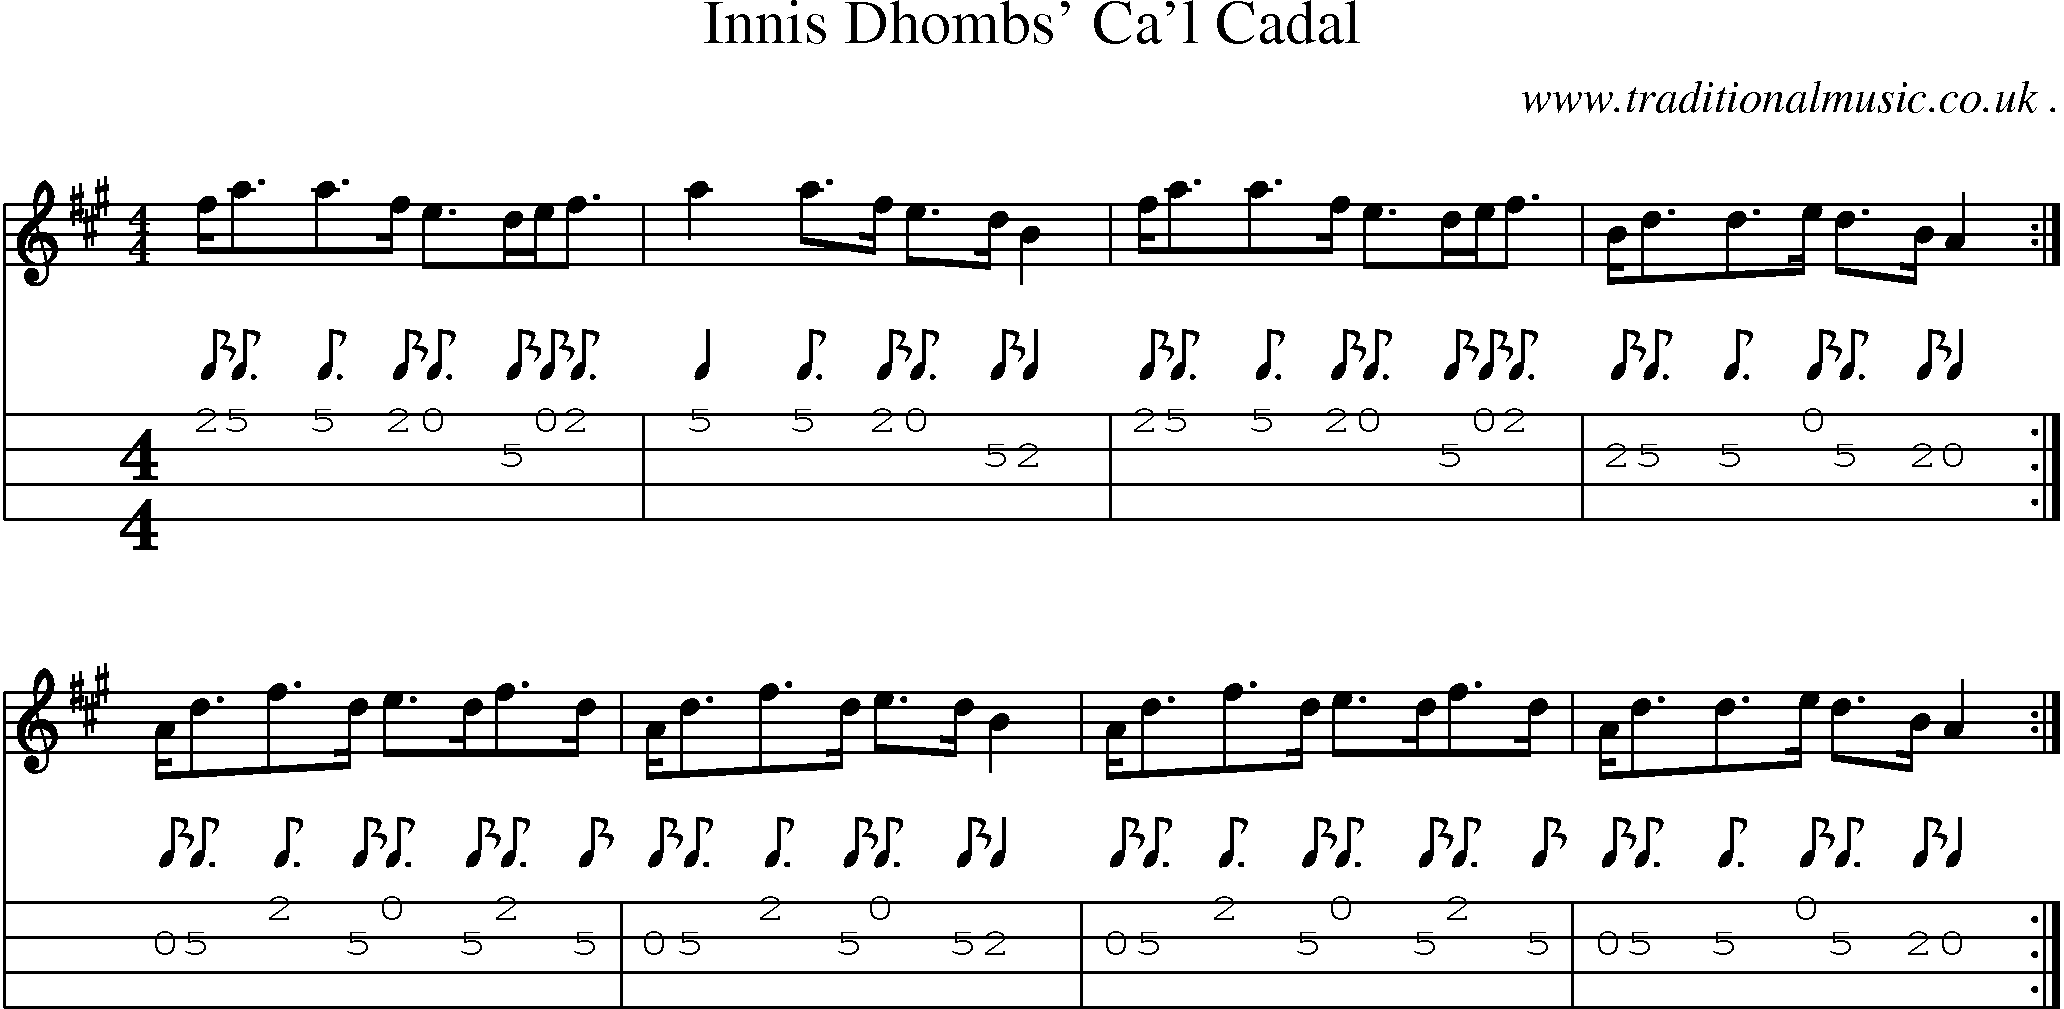 Sheet-music  score, Chords and Mandolin Tabs for Innis Dhombs Cal Cadal